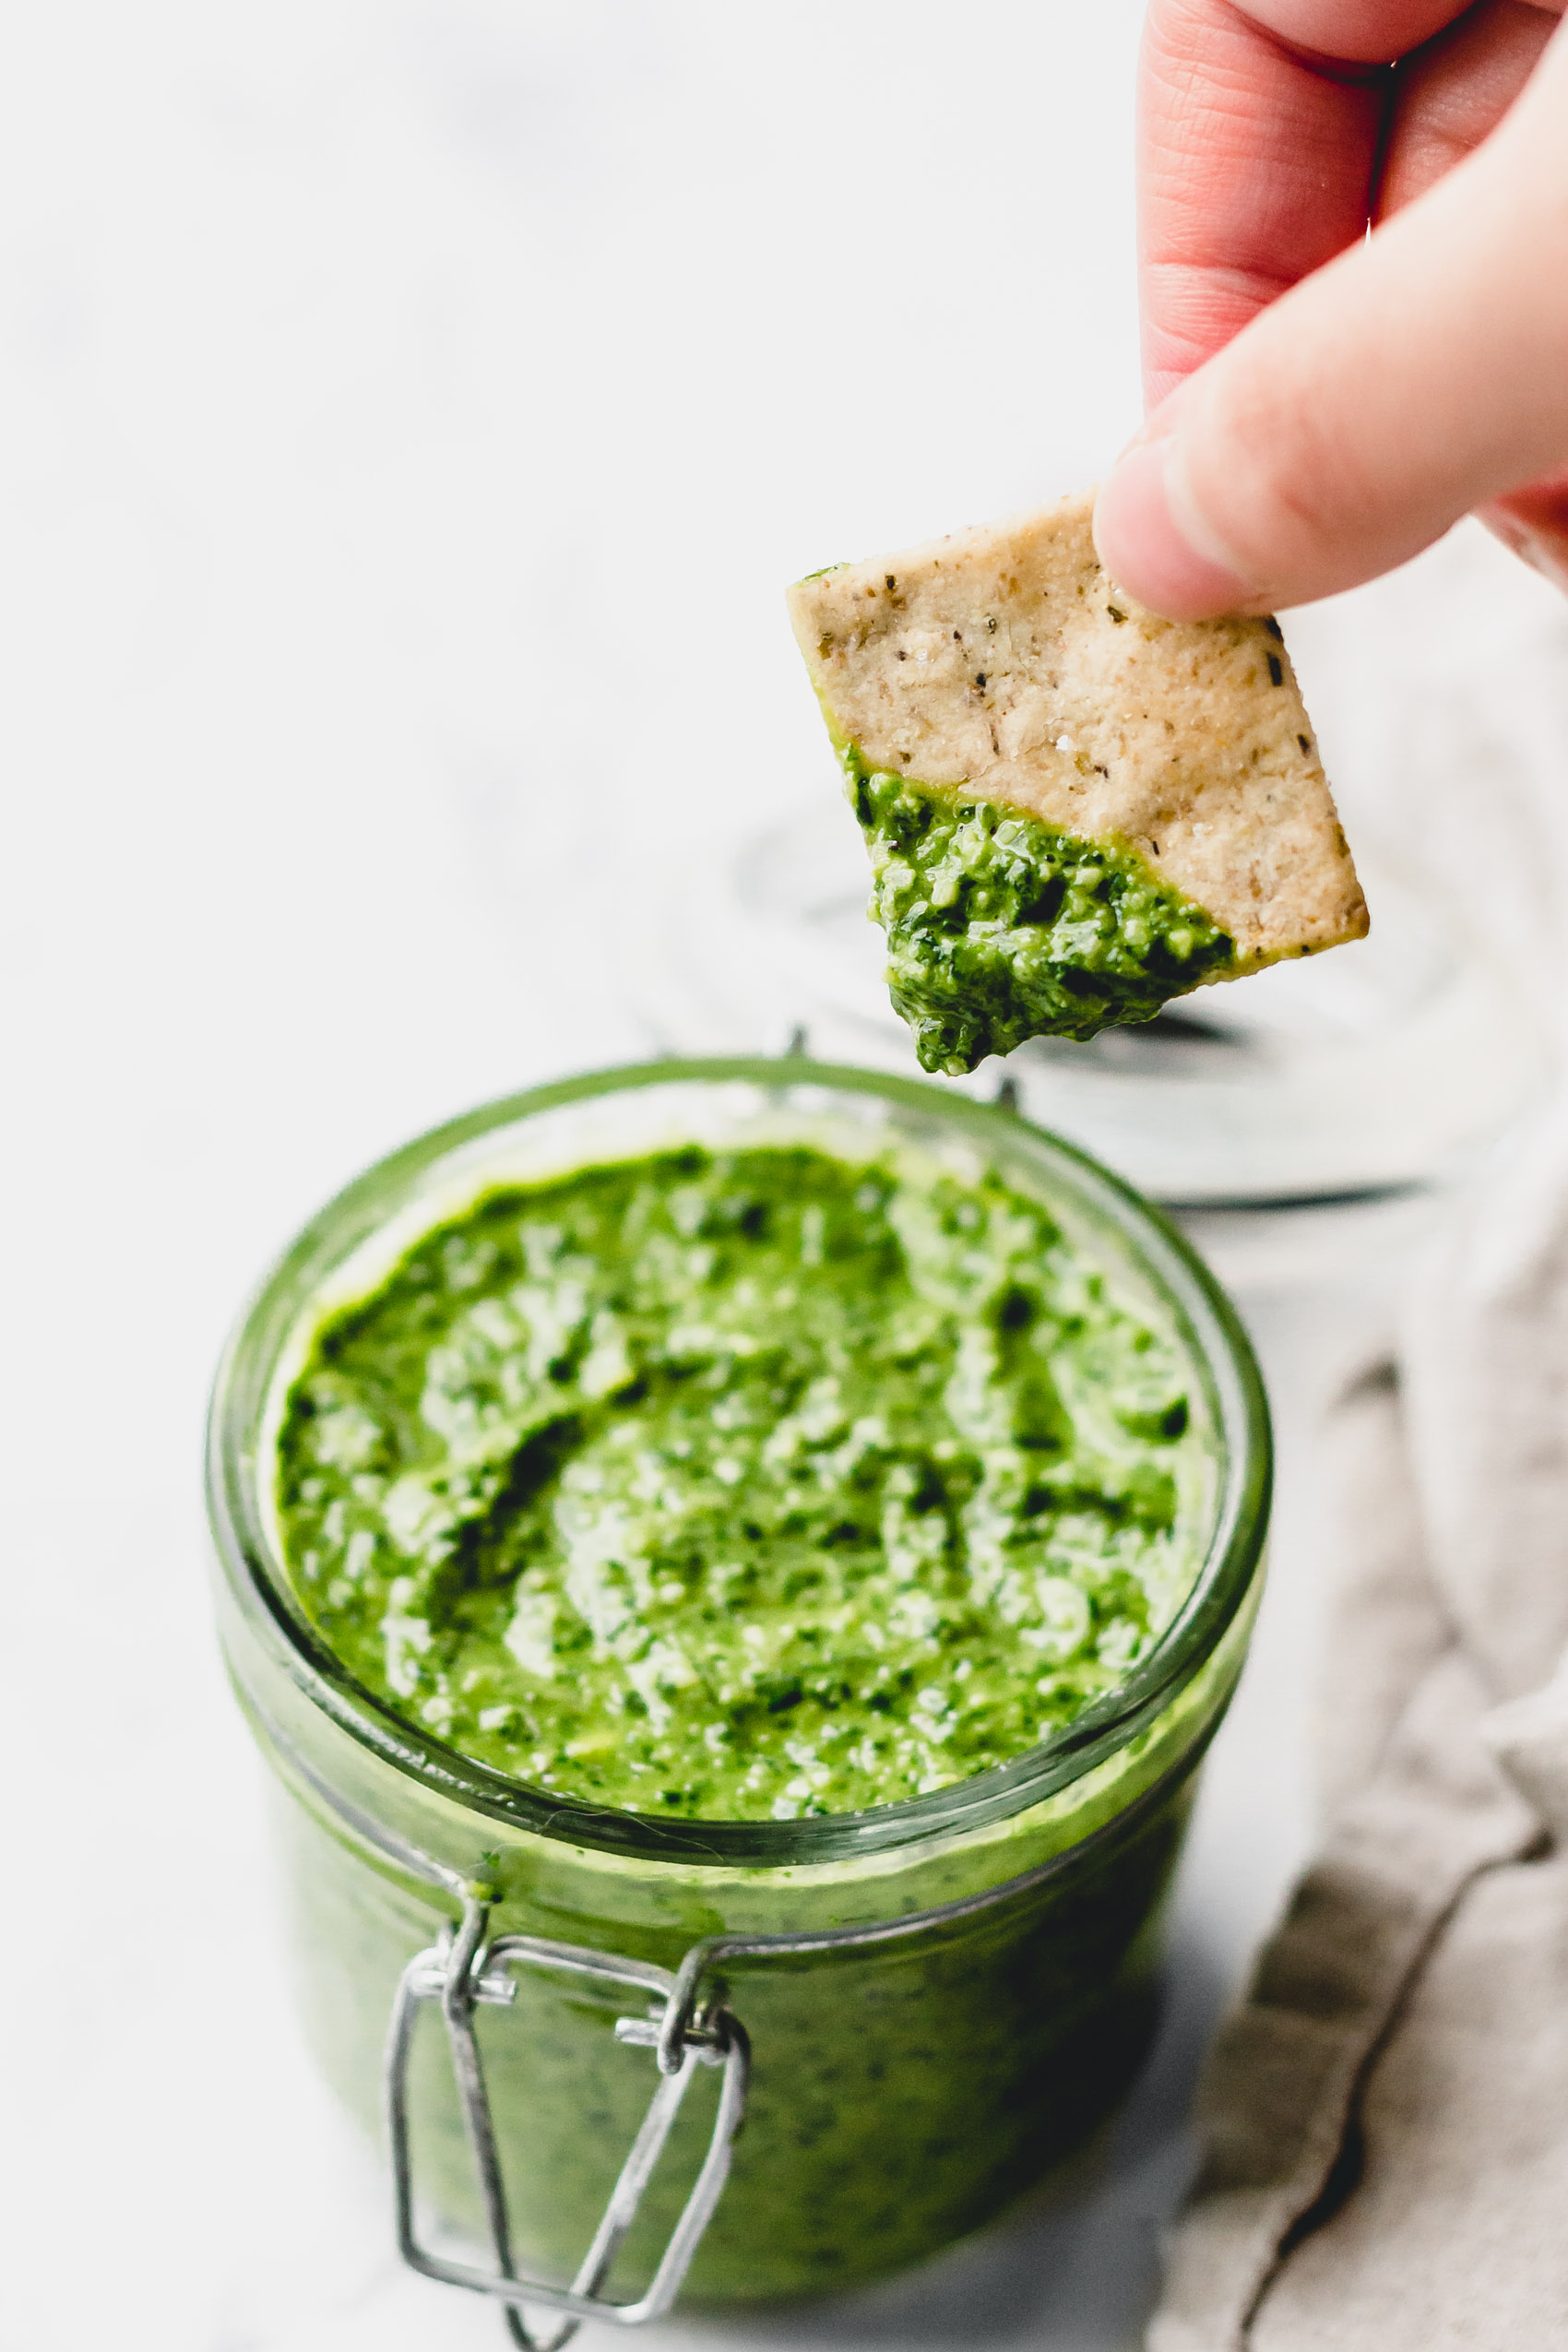 a cracker that has been dipped into a jar of pesto